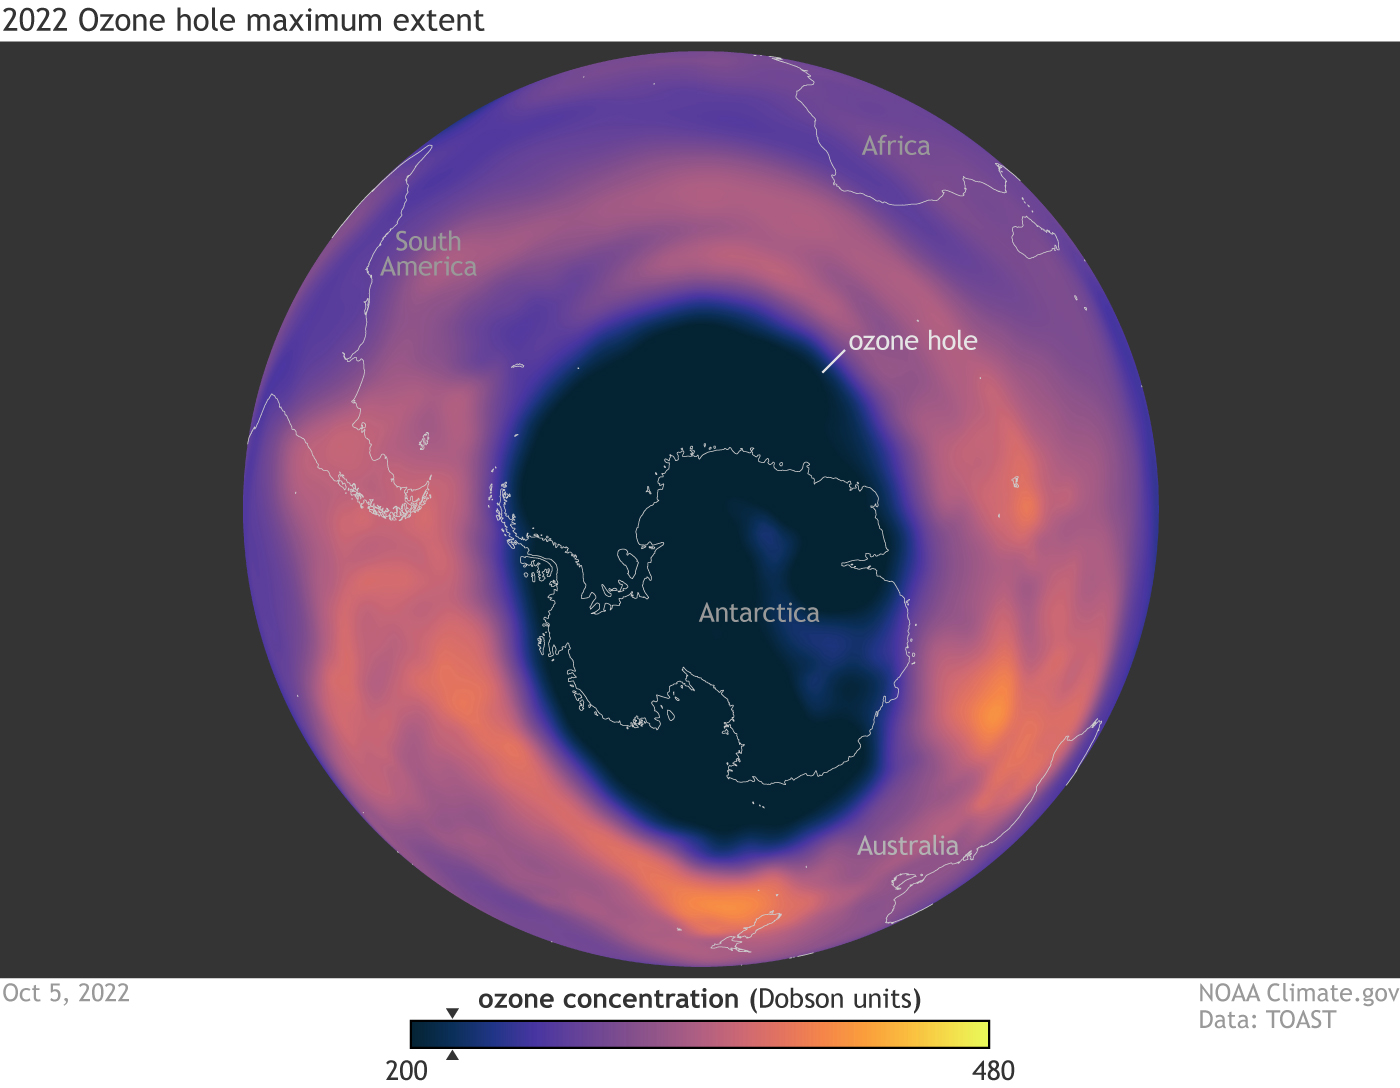 Graphic showing the the maximum extent of the 2022 ozone hole over Antarctica was slightly smaller than the 2021 maximum, and well below the average seen in 2006 when the hole size peaked. 